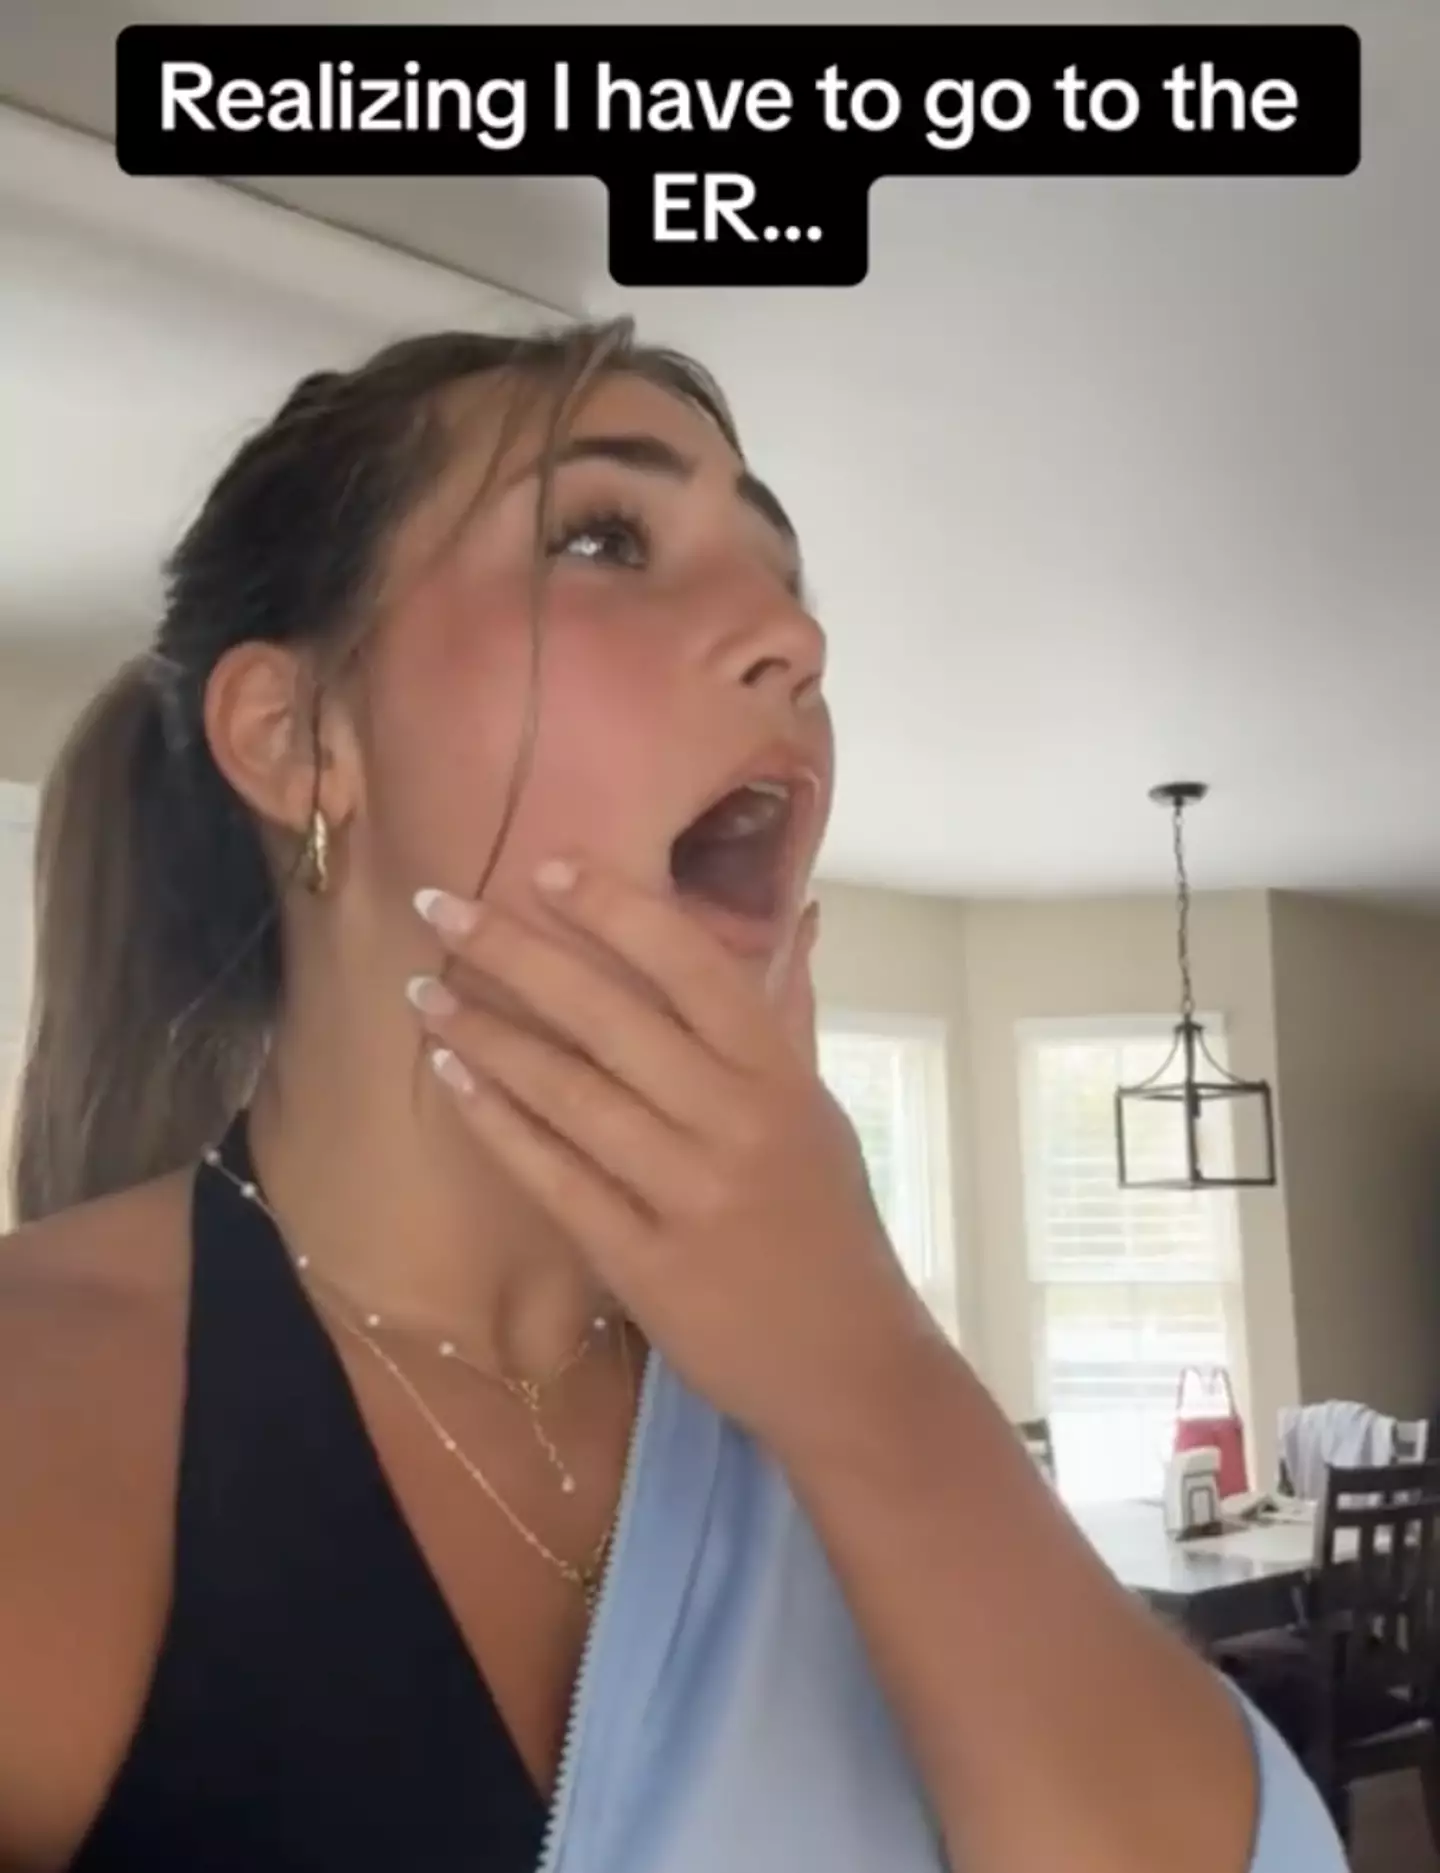 A TikToker was able to find the funny side of things when she realized that her jaw wouldn’t close. (TikTok?@jennasinatra)